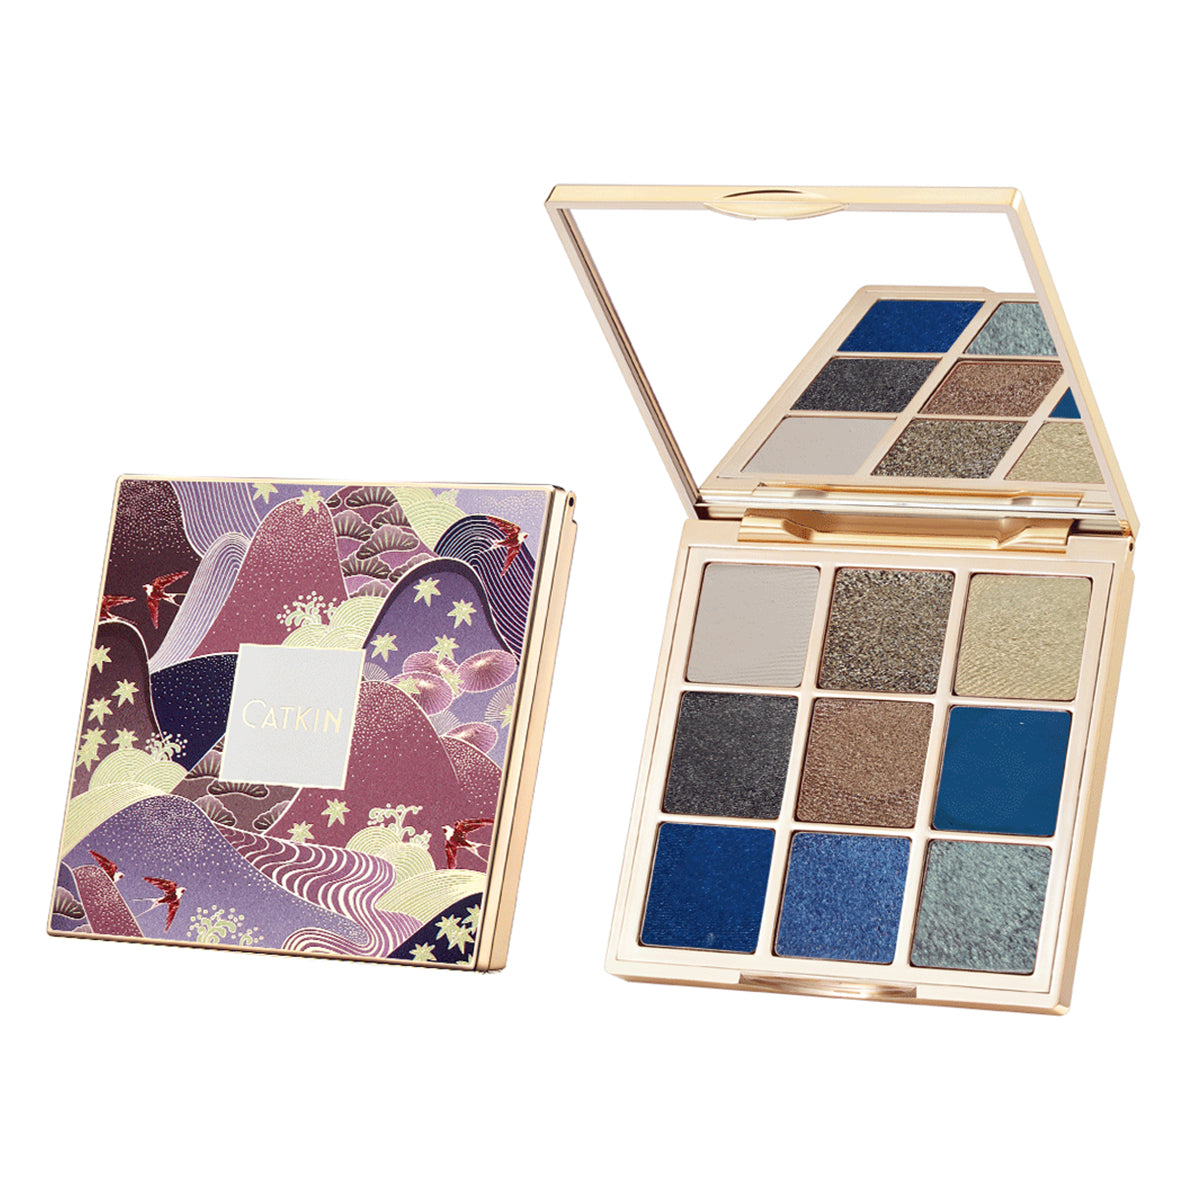 CATKIN 9 Pans Sparkly Blue Eyeshadow Palette C14 Colorful Highly Pigmented Matte Shimmer Long Lasting Eyeshadow